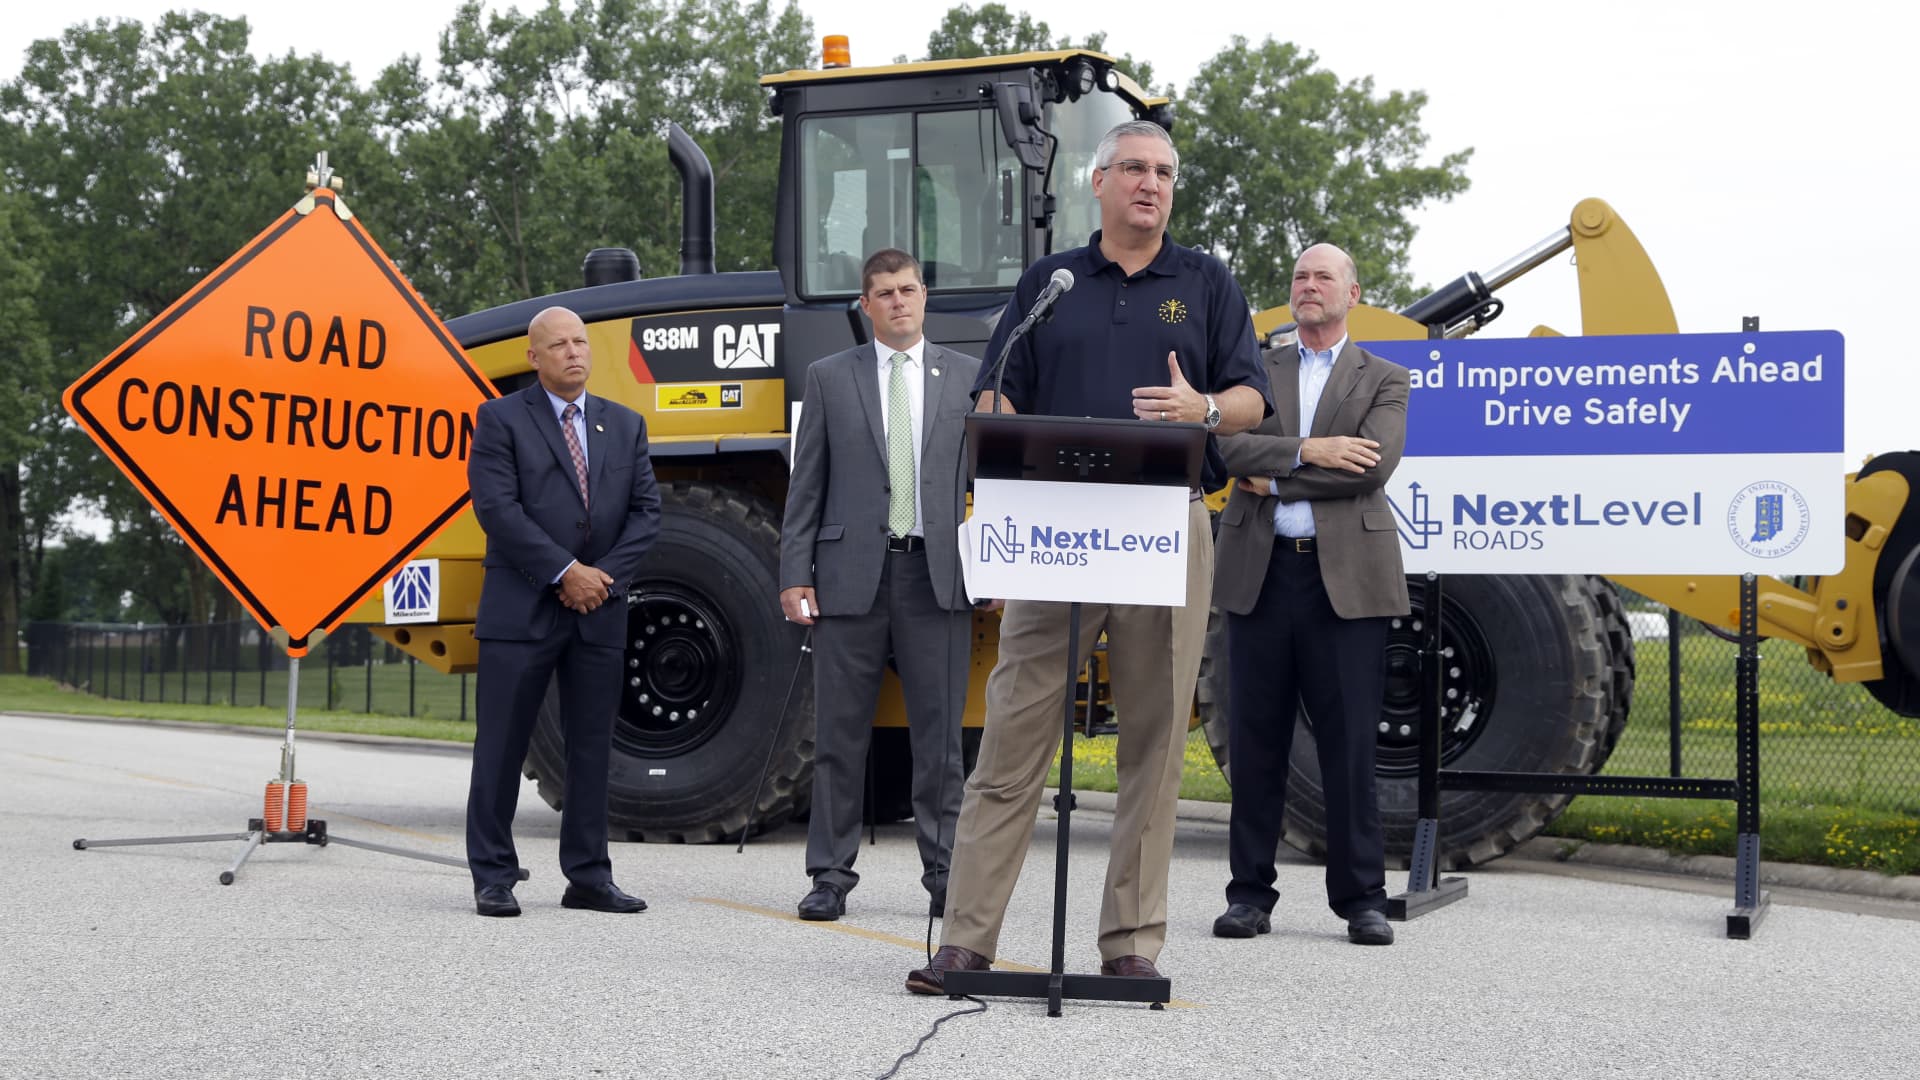 Indiana Gov. Eric Holcomb announces a list of infrastructure projects that will get funding in next five years under Indiana's Next Level Roads initiative, a 20-year program to improve Indiana's roads and bridges, during a press conference in Indianapolis.